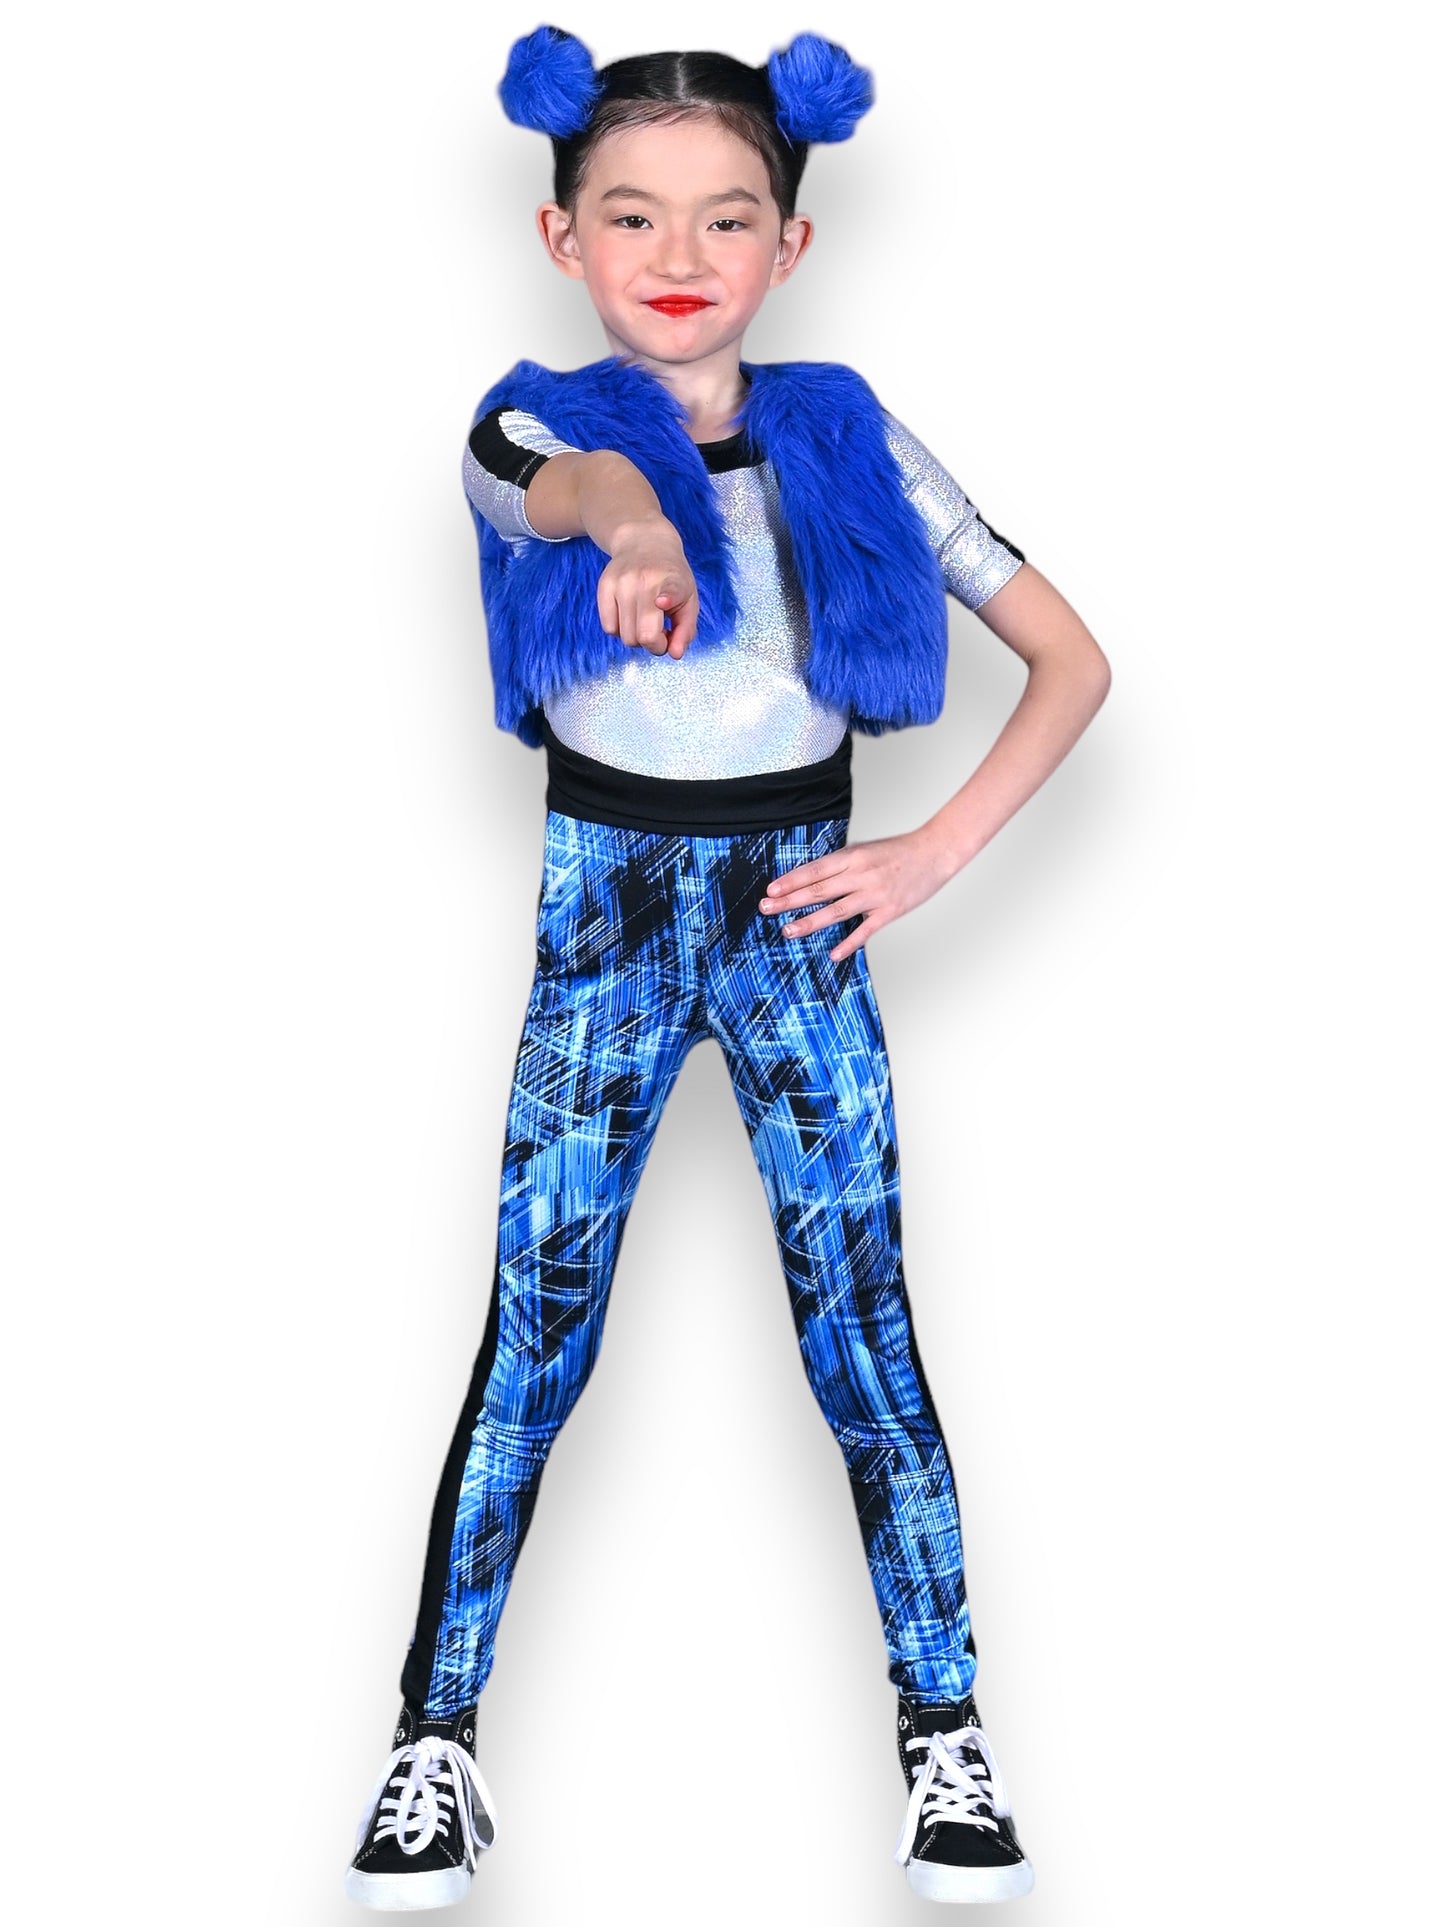 Medium child in blue and silver spandex unitard with foil dot details, complemented by a blue faux fur vest. The child has two blue hair poufs with clips.